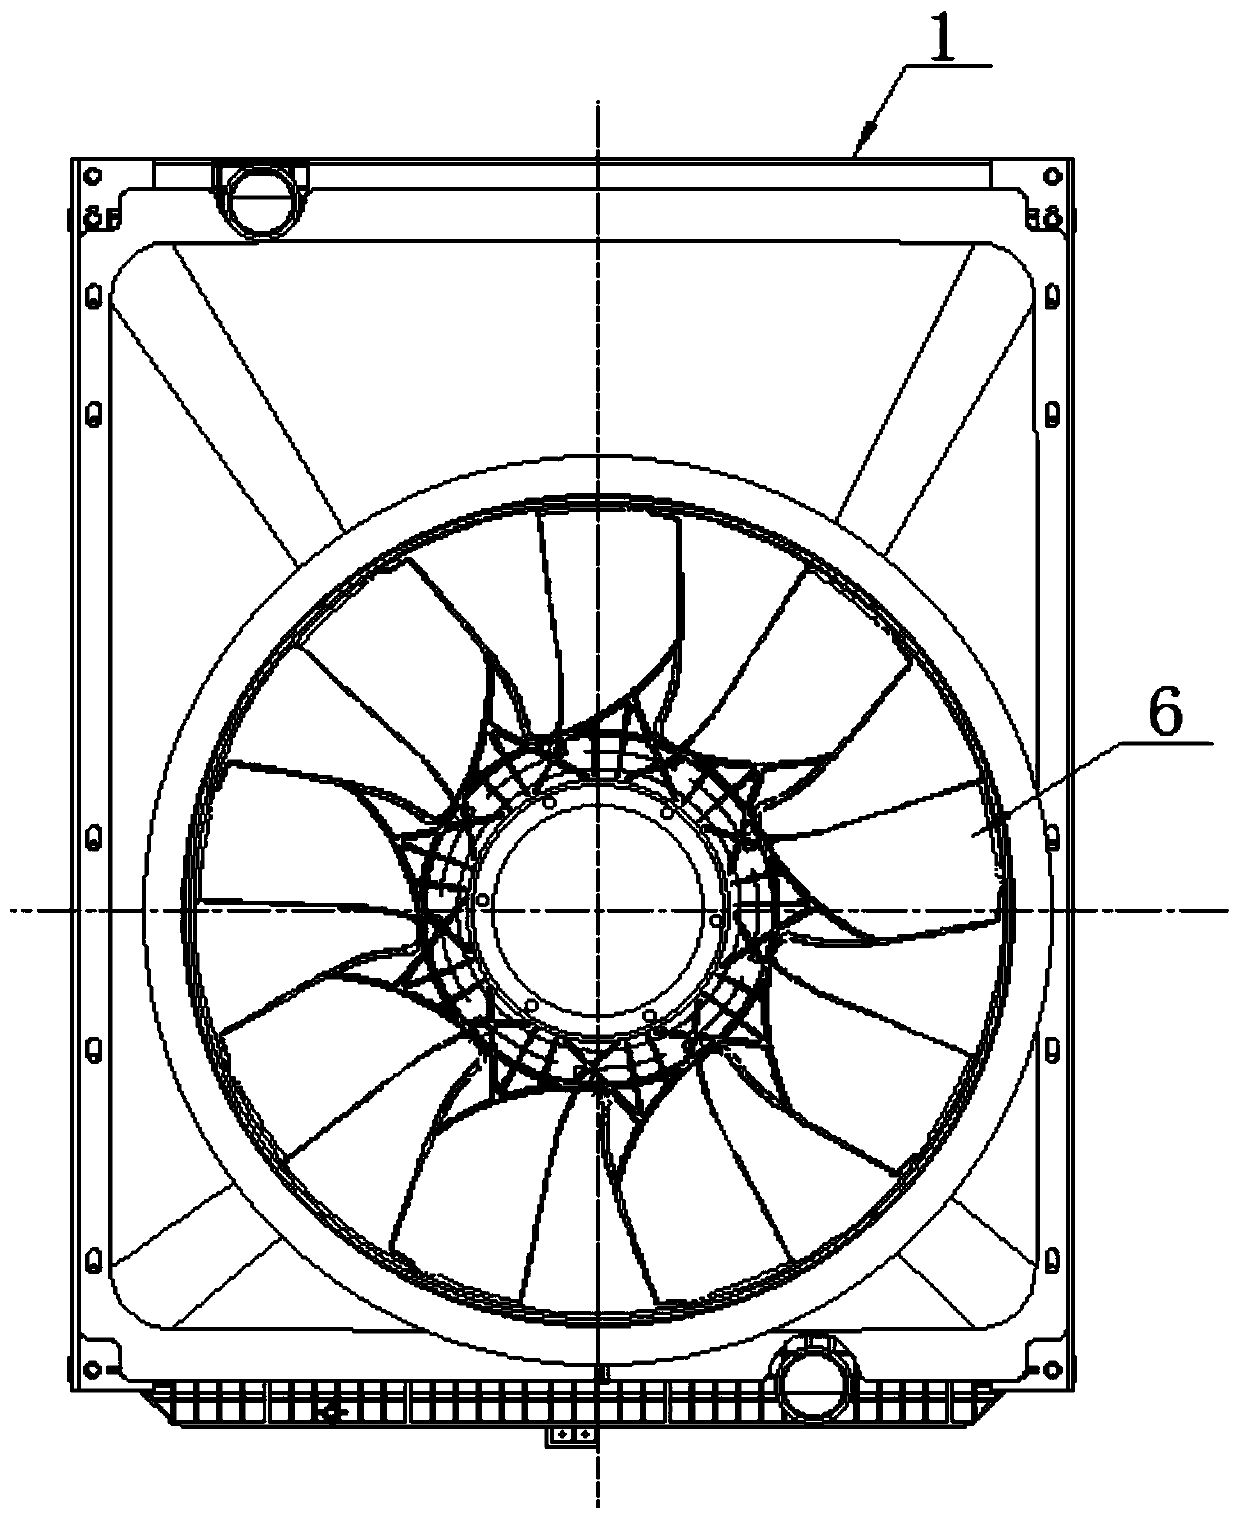 Flow guiding cooling system composed of annular fan and wind protecting ring